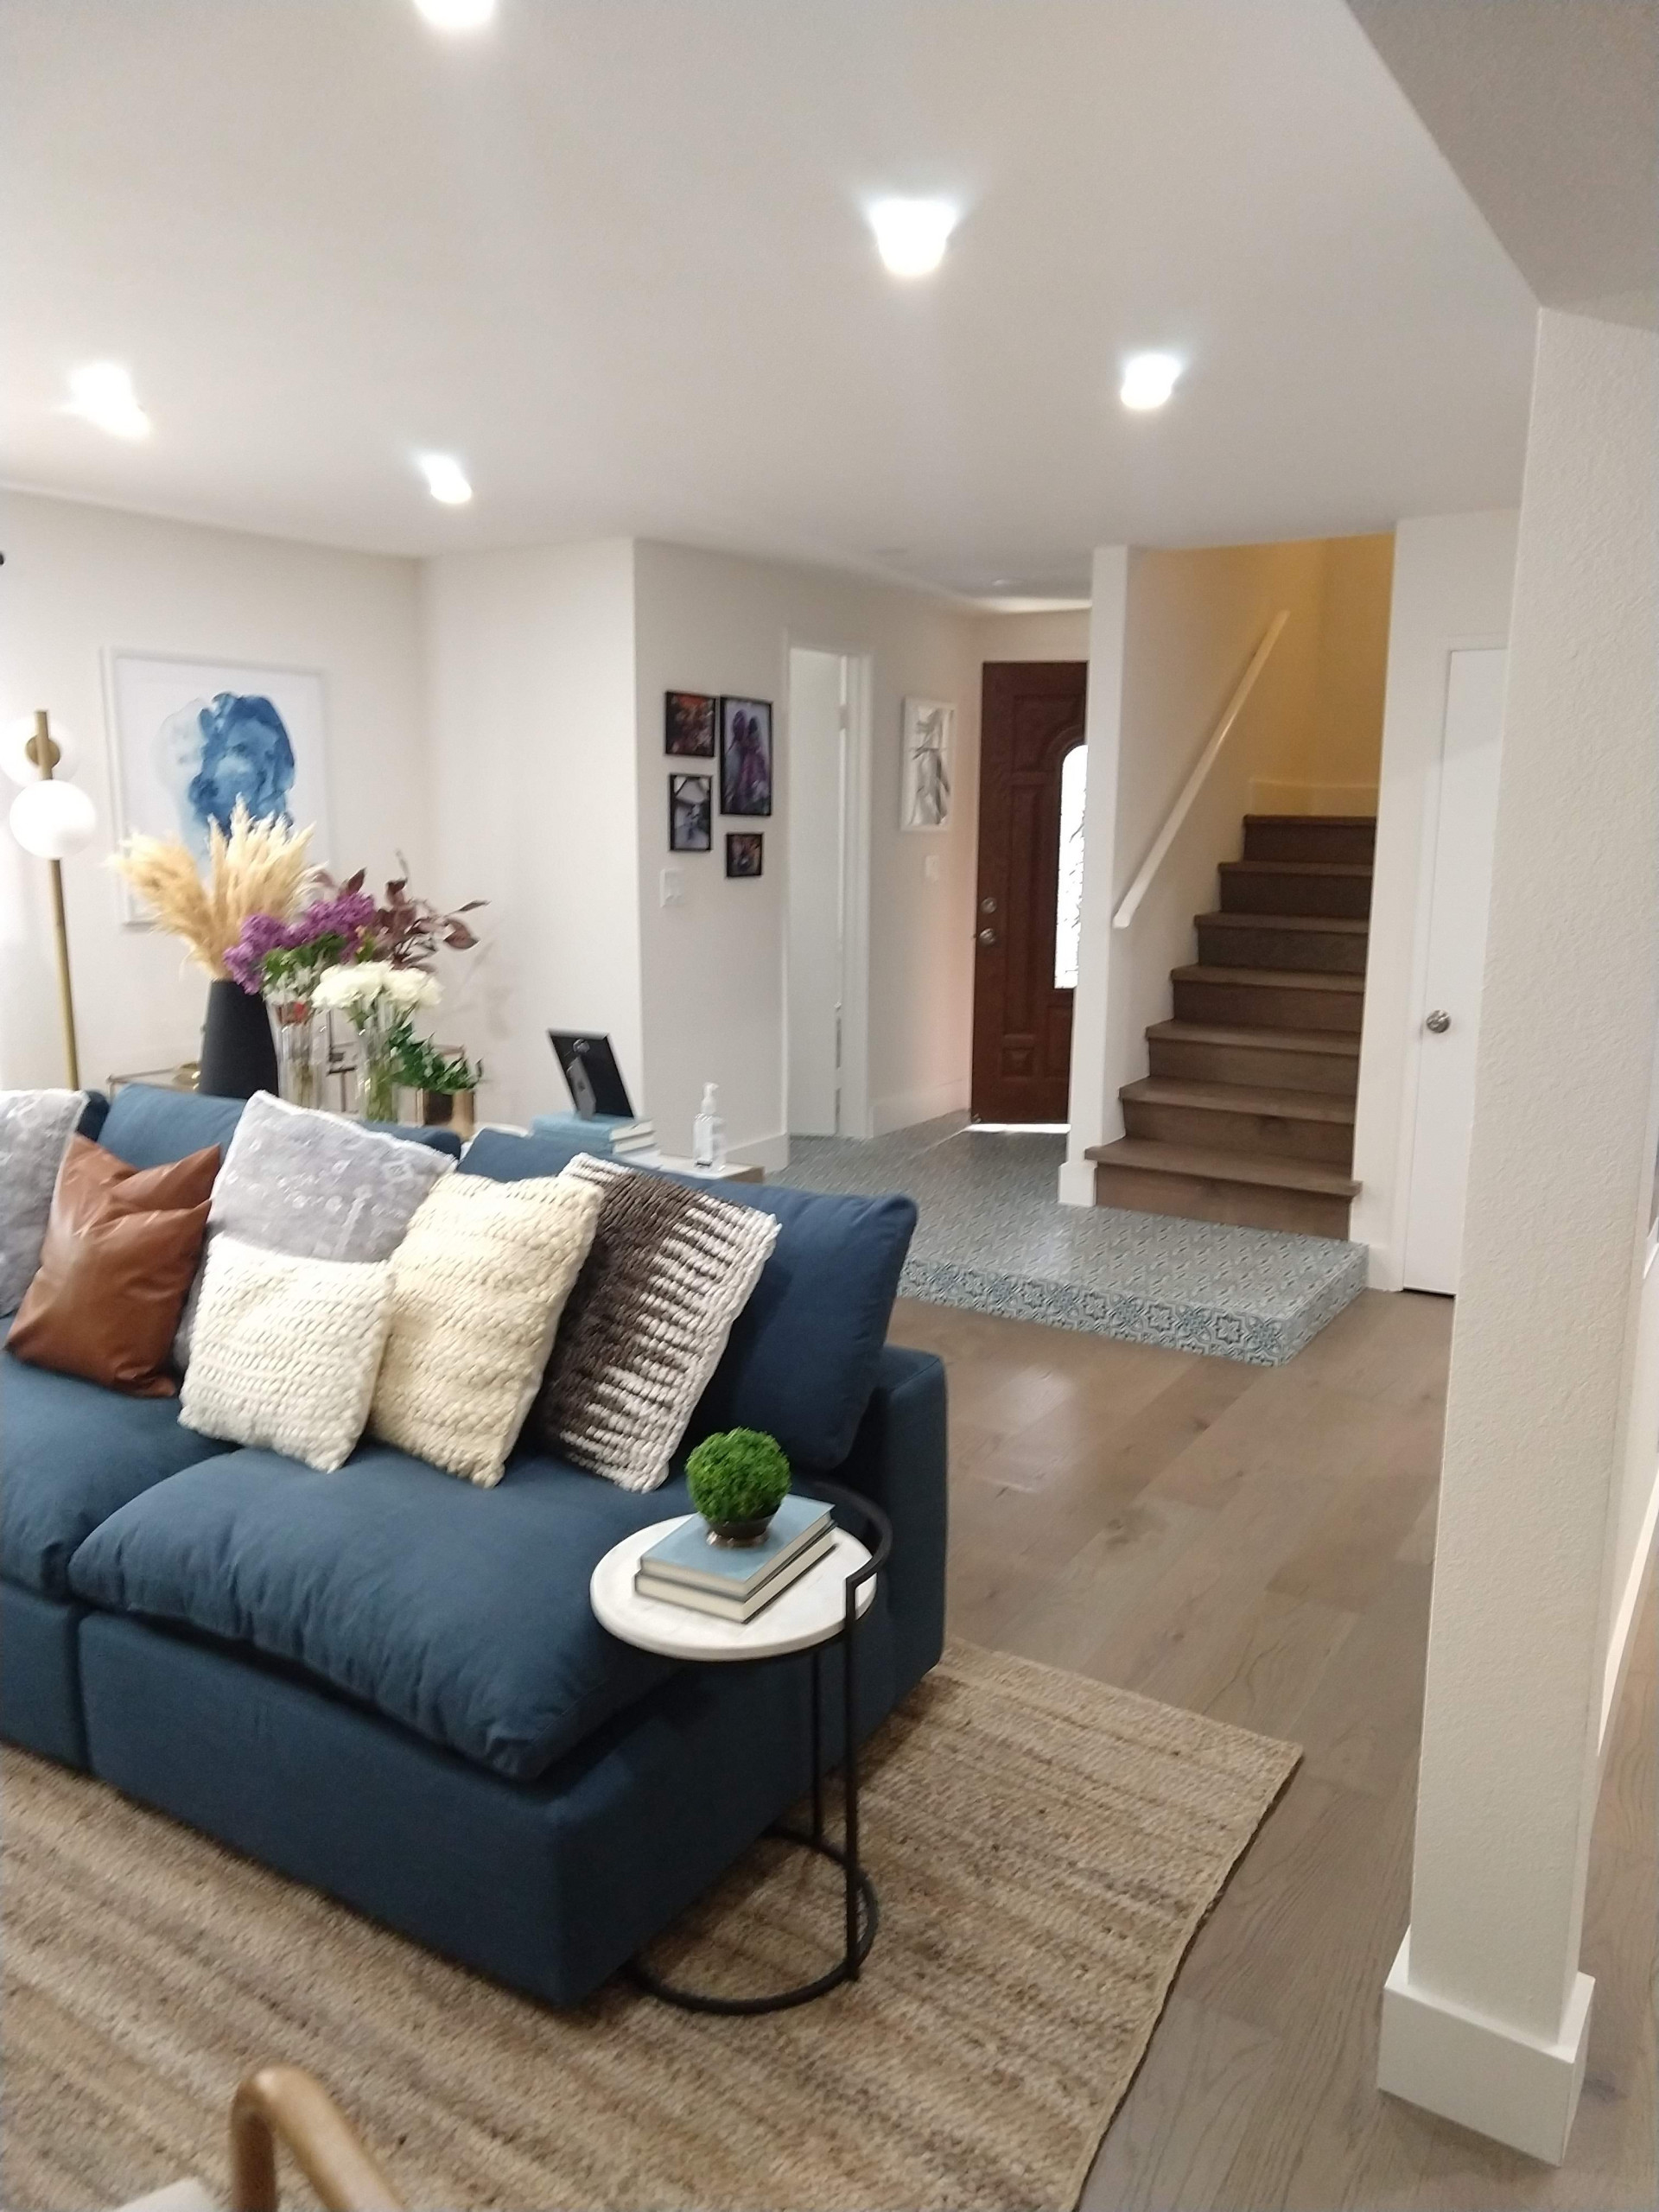 Property Brothers Forever Home - Season 5 - Ep - 13 Glassell Park